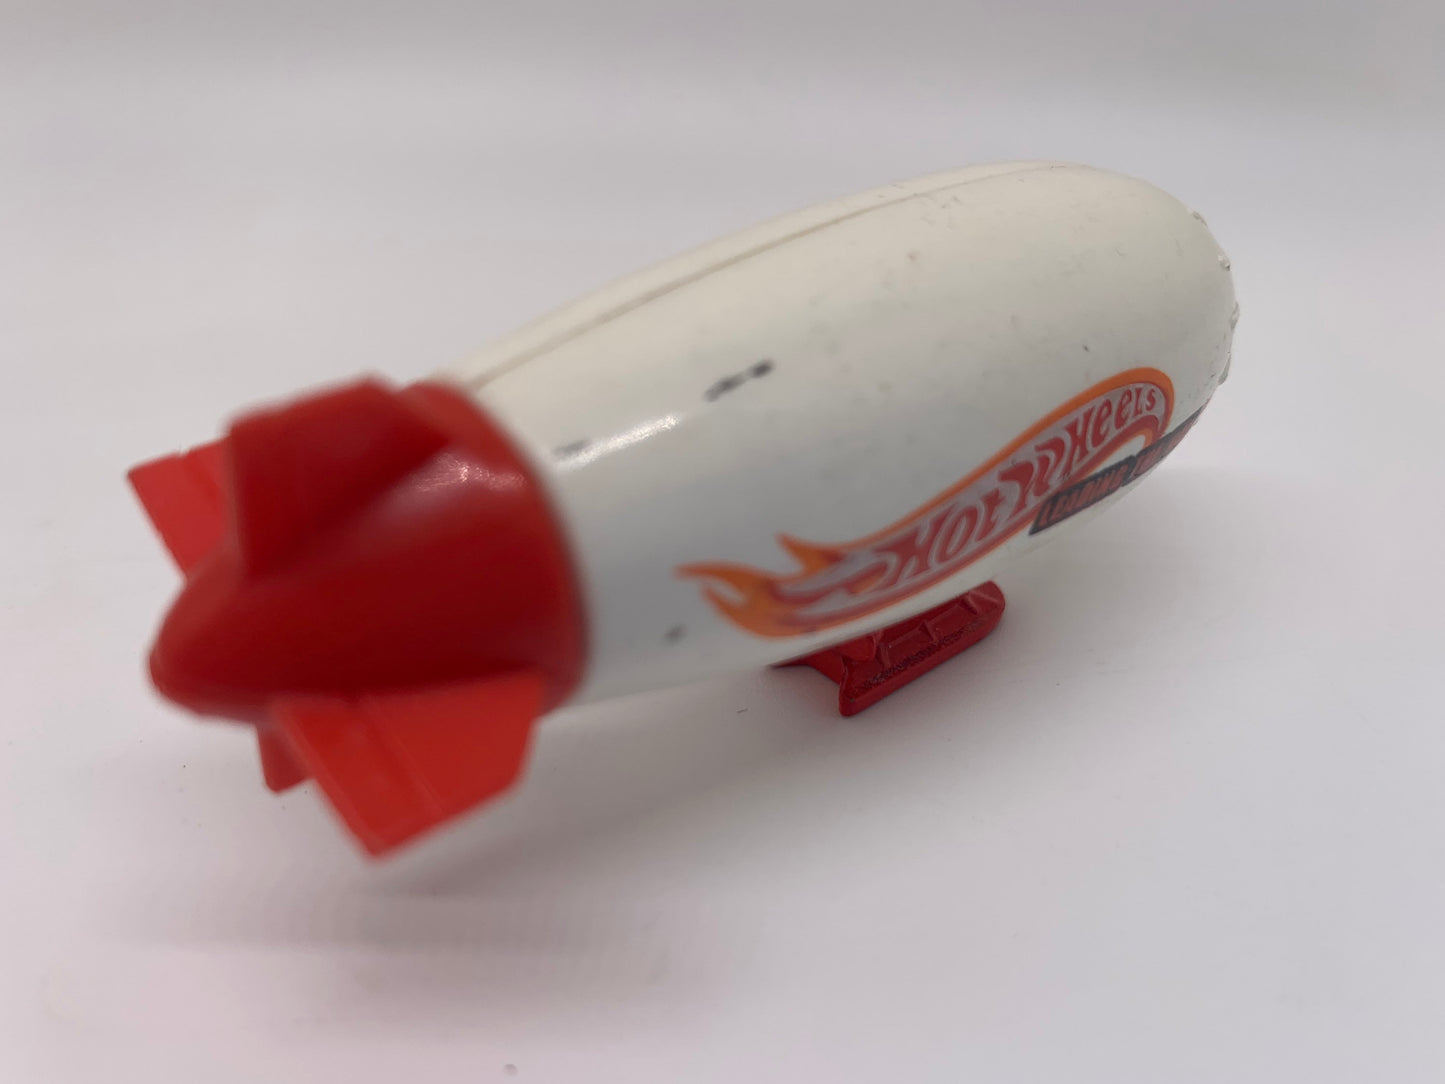 Hot Wheels Blimp White Virtual Collection Perfect Birthday Gift Miniature Collectible Scale Model Toy Car